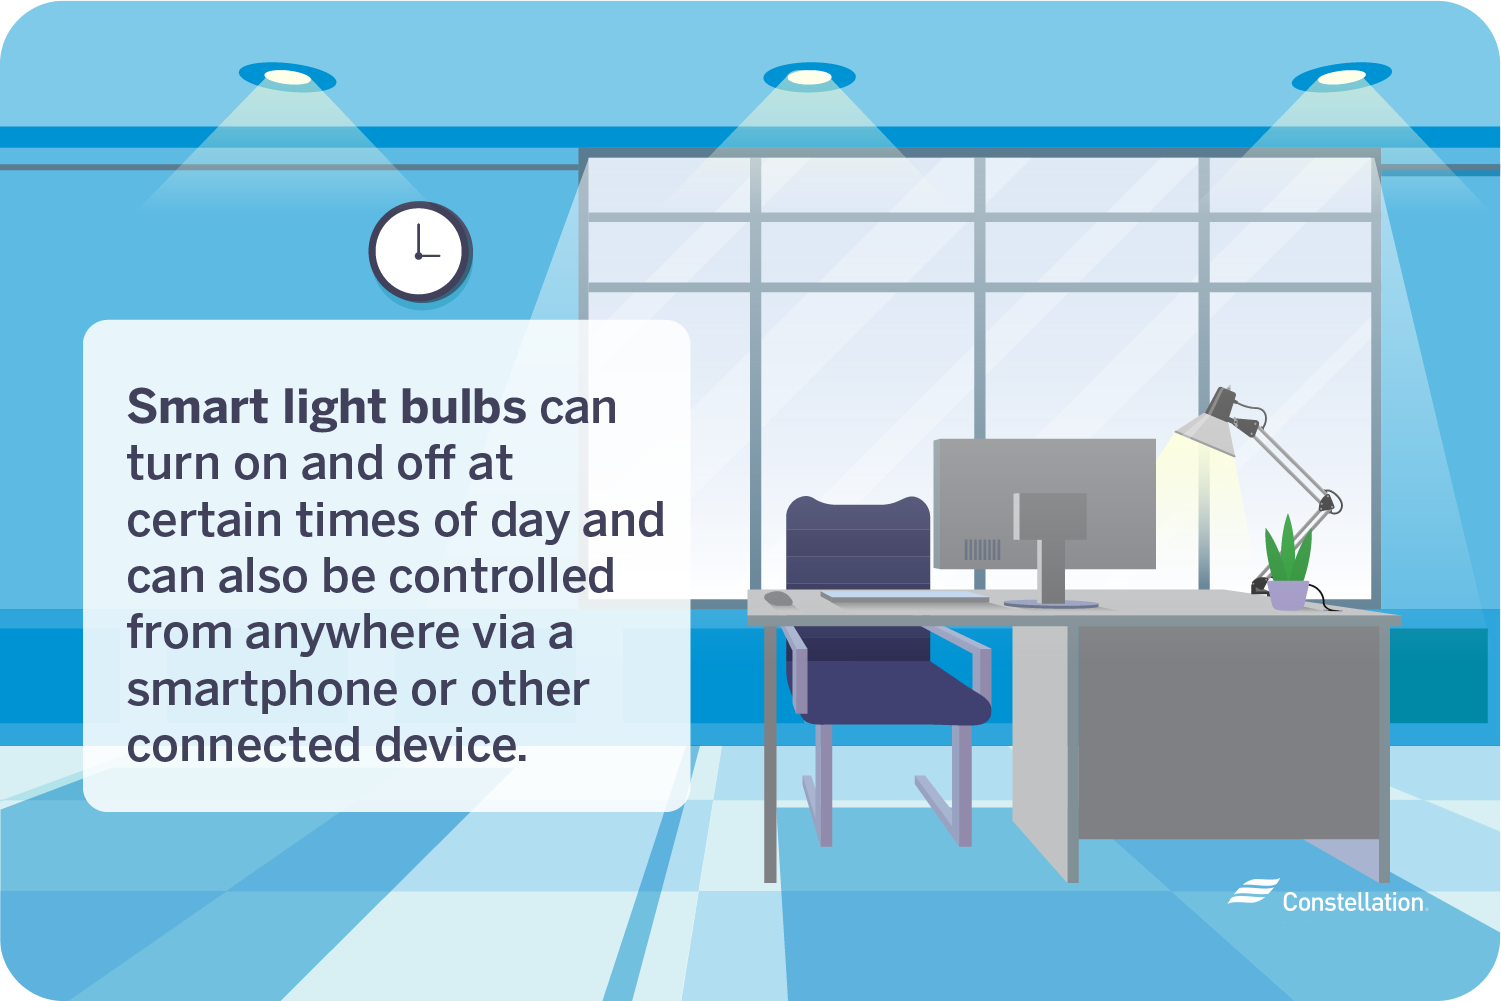 Automating office lighting with smart bulbs